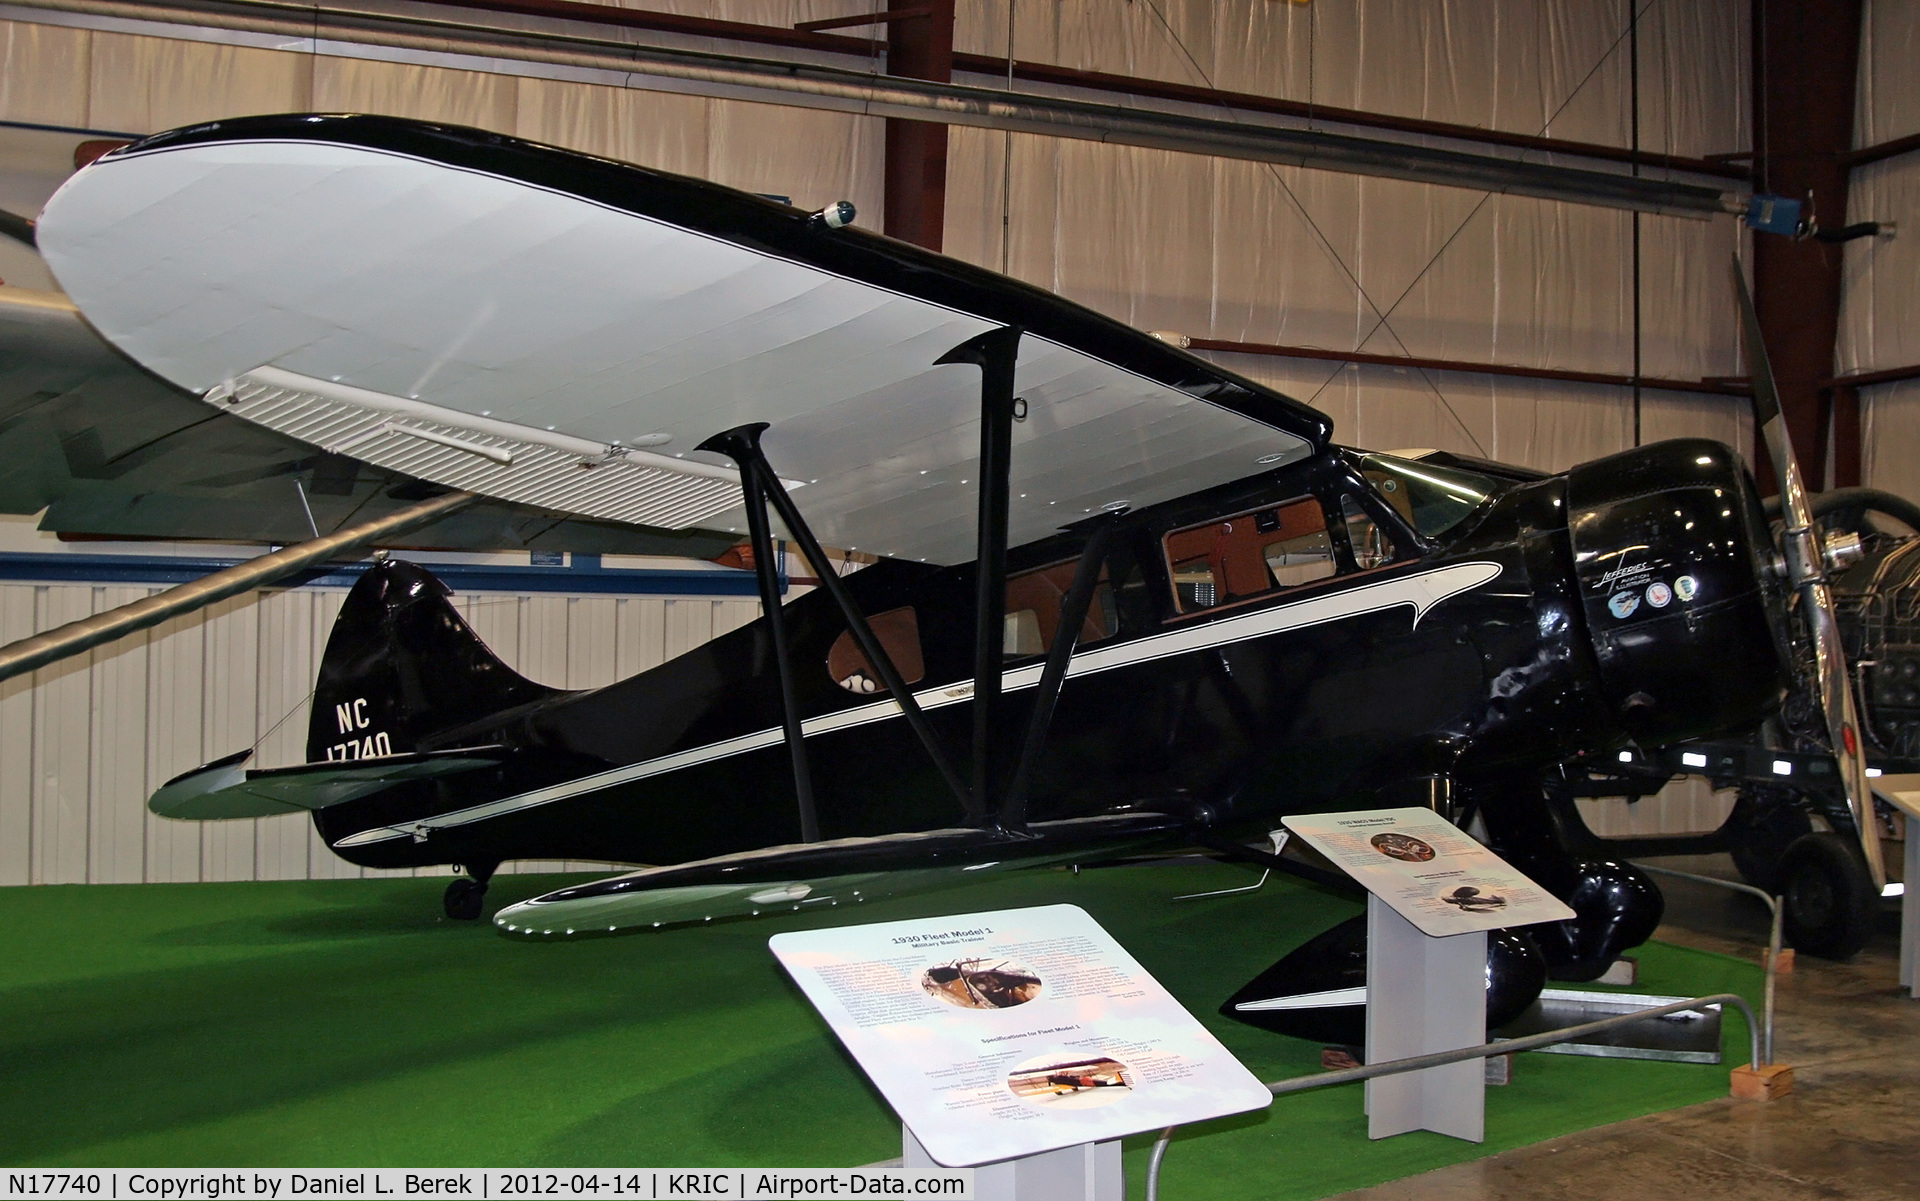 N17740, 1935 Waco YOC C/N 4279, This beautiful and rare Waco monoplane can be admired at the Virginia Aviation Museum.  Previous registration included N540Y.